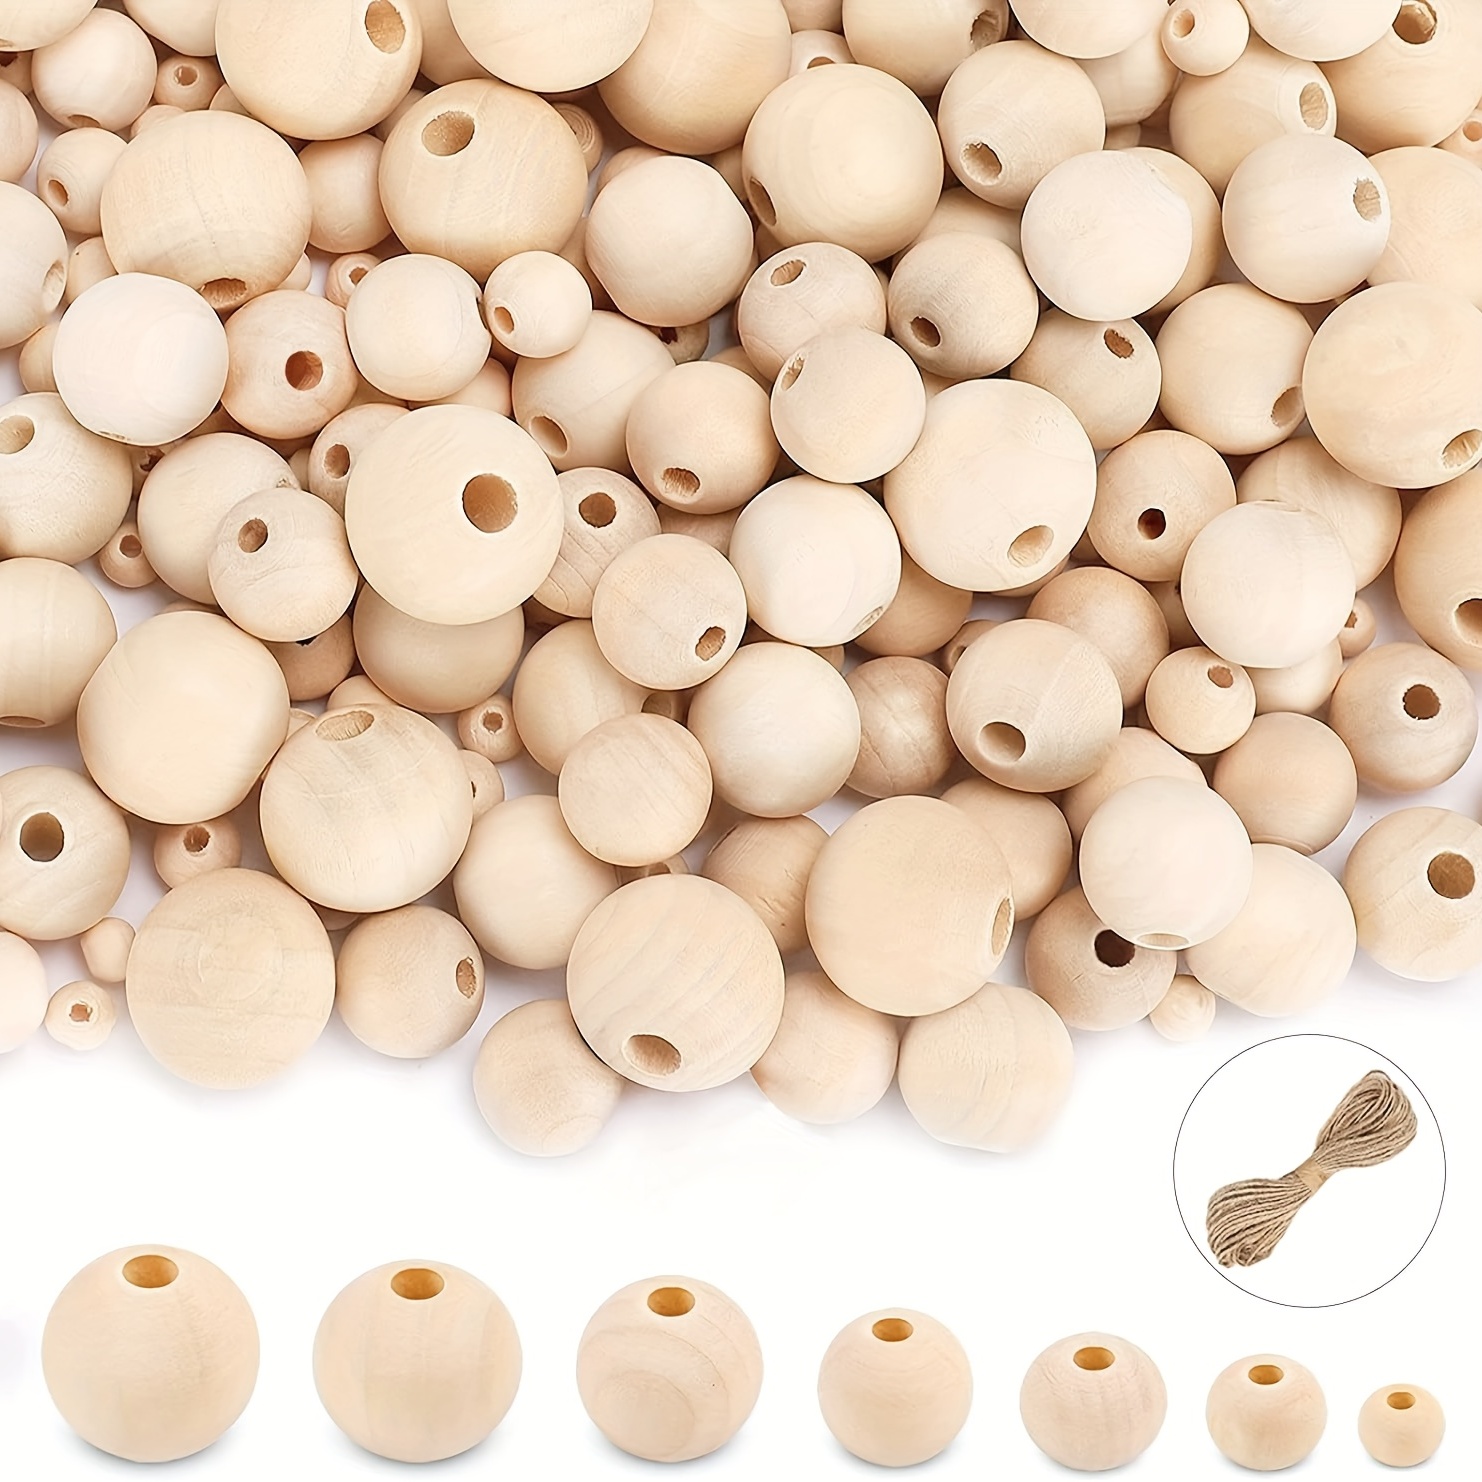  1 Set 600 Pcs Beading kit Decorative Beads DIY Beads Wood Craft  Beads Shape Craft Wood Bead Kit Arts and Crafts for Kids Beads for Kids  Jewelry Wooden White Child Beaded 